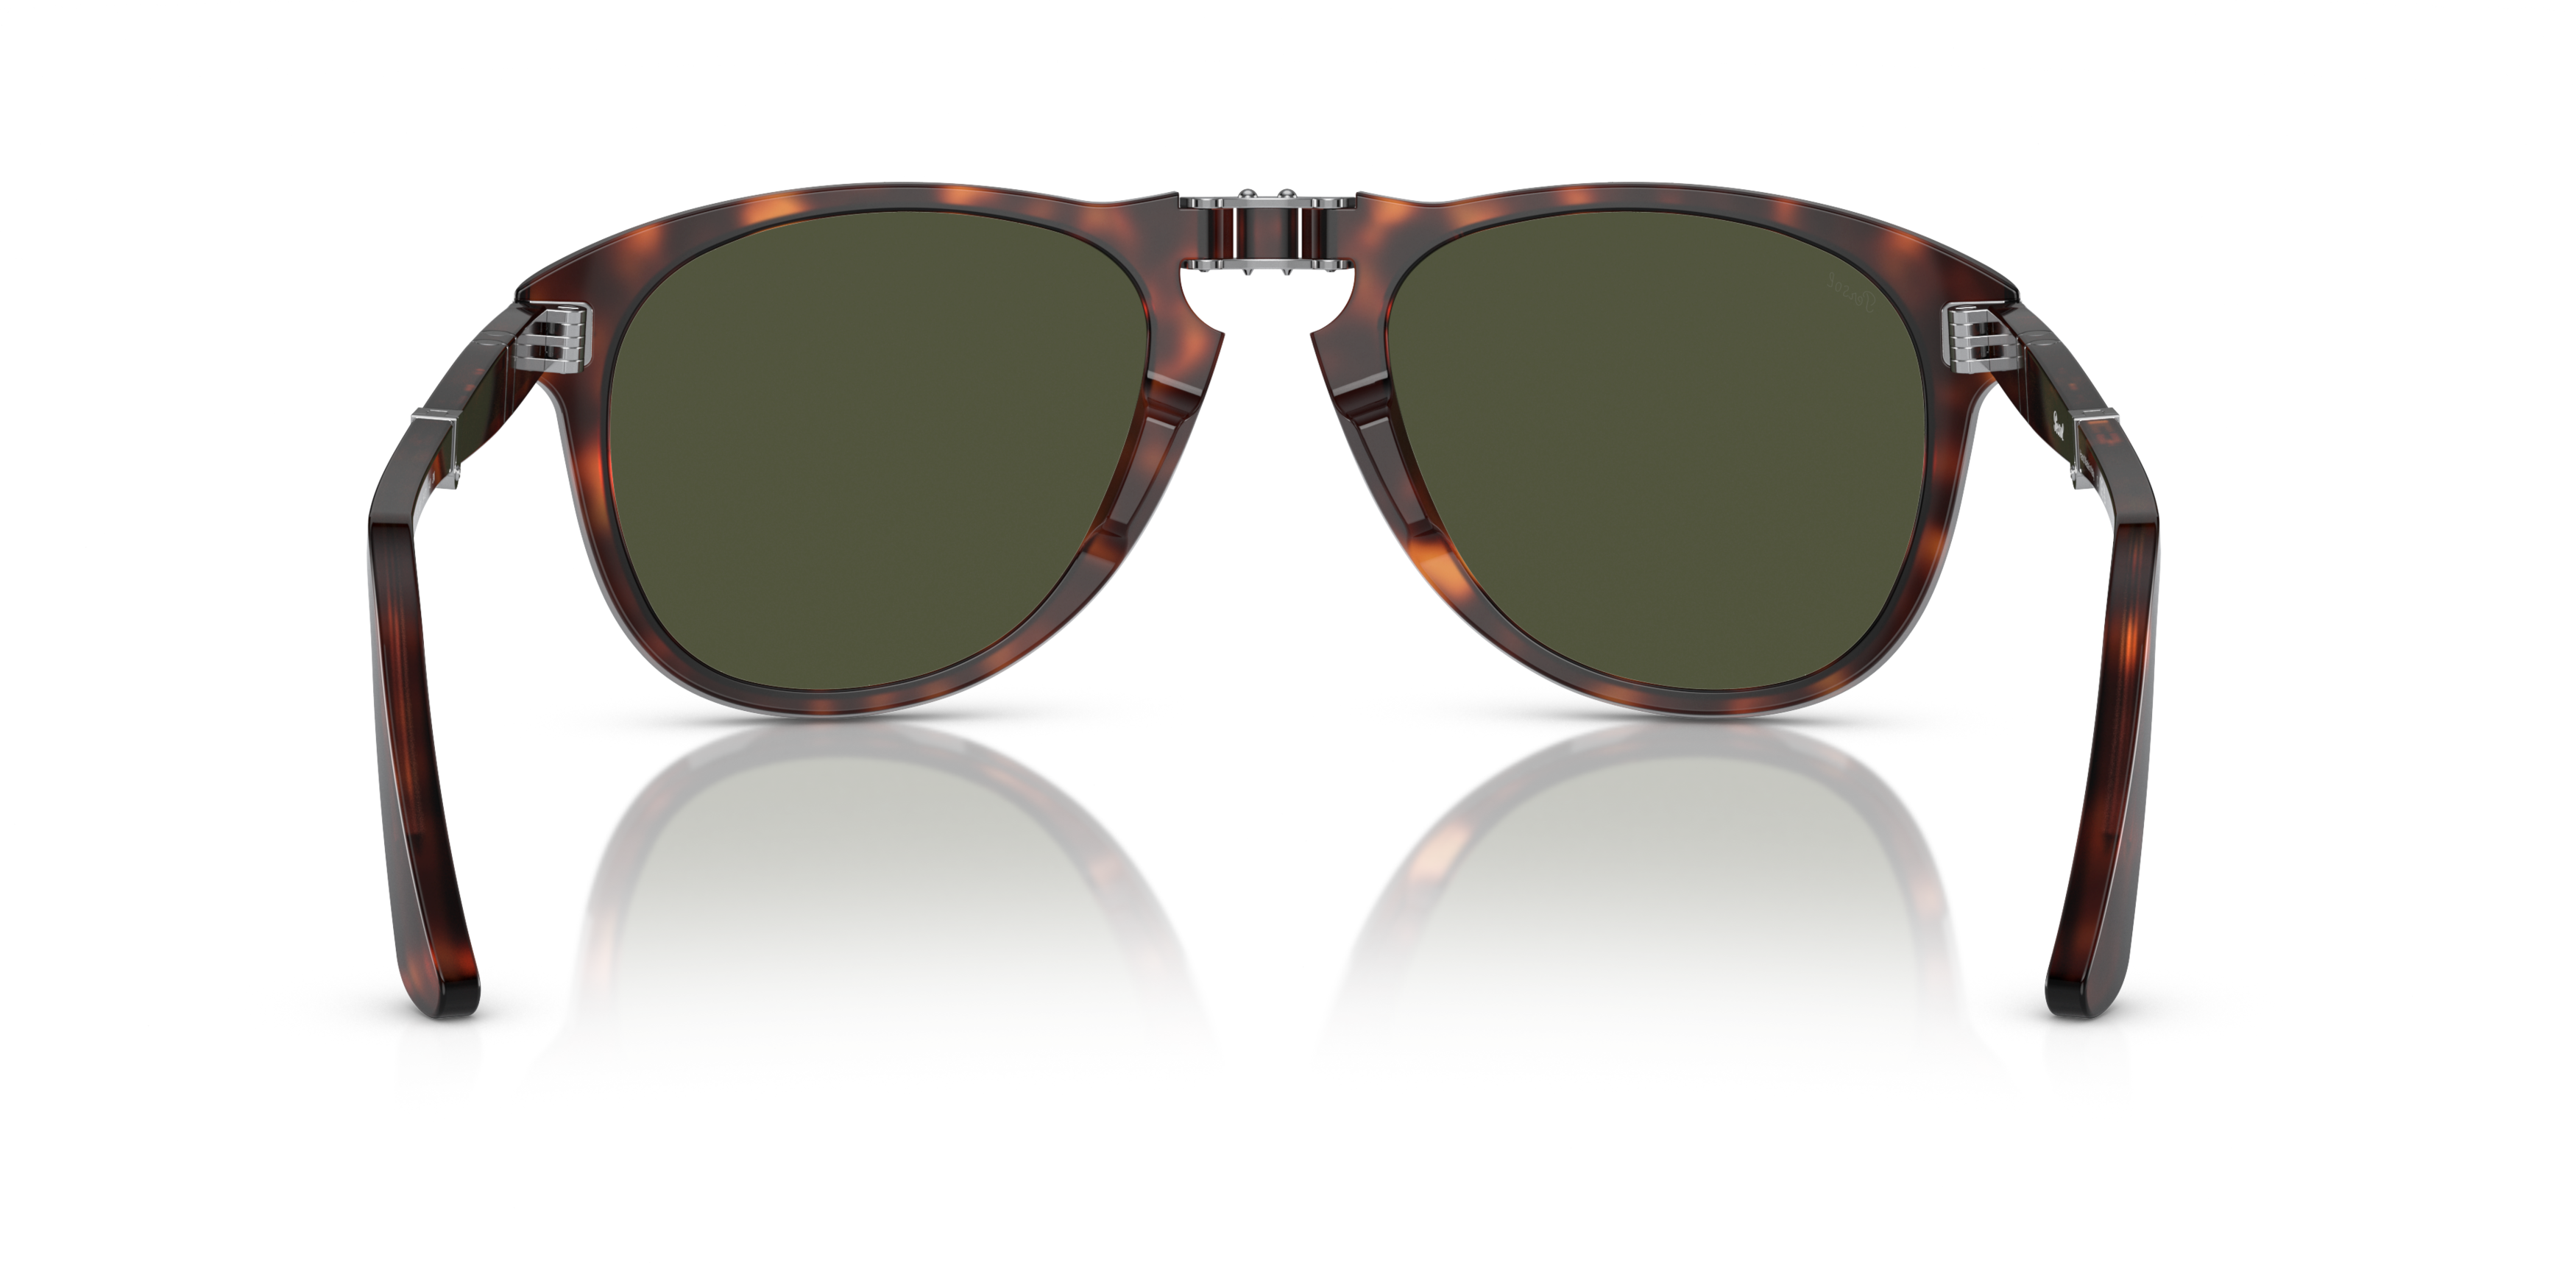 [products.image.detail02] Persol 0PO0714 24/31